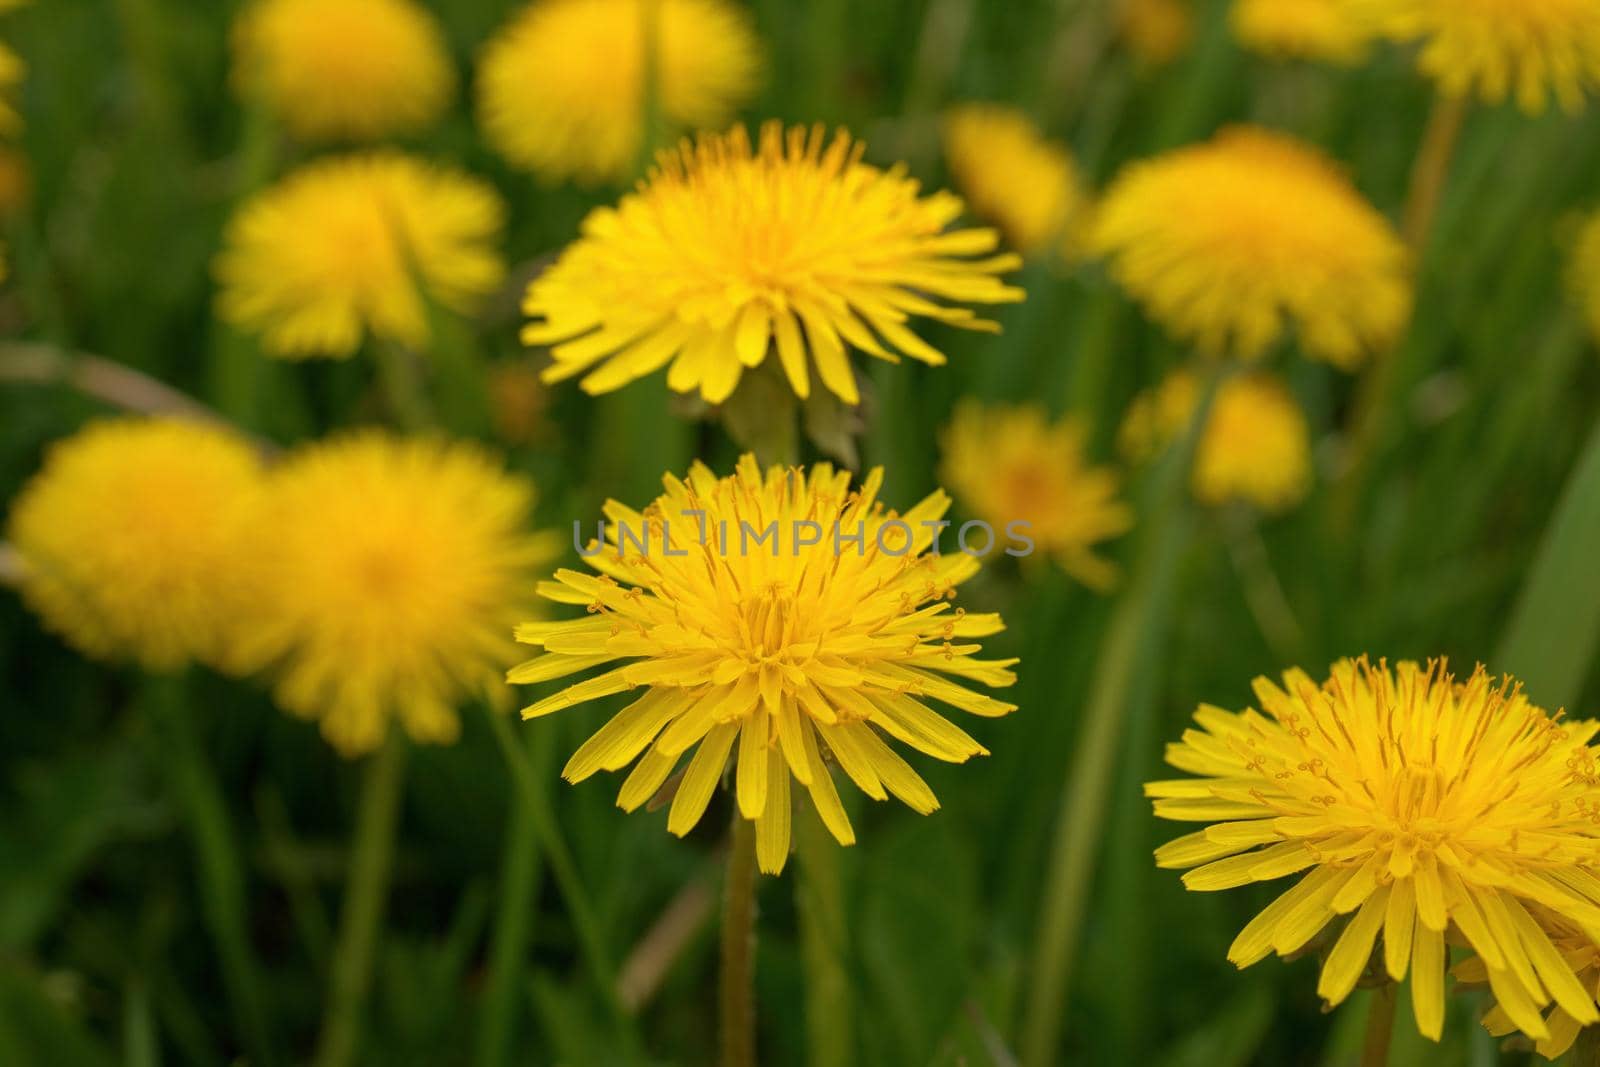 Low angle Close up of Dandelion Flowers or Weeds Growing in Grass in Spring by markvandam